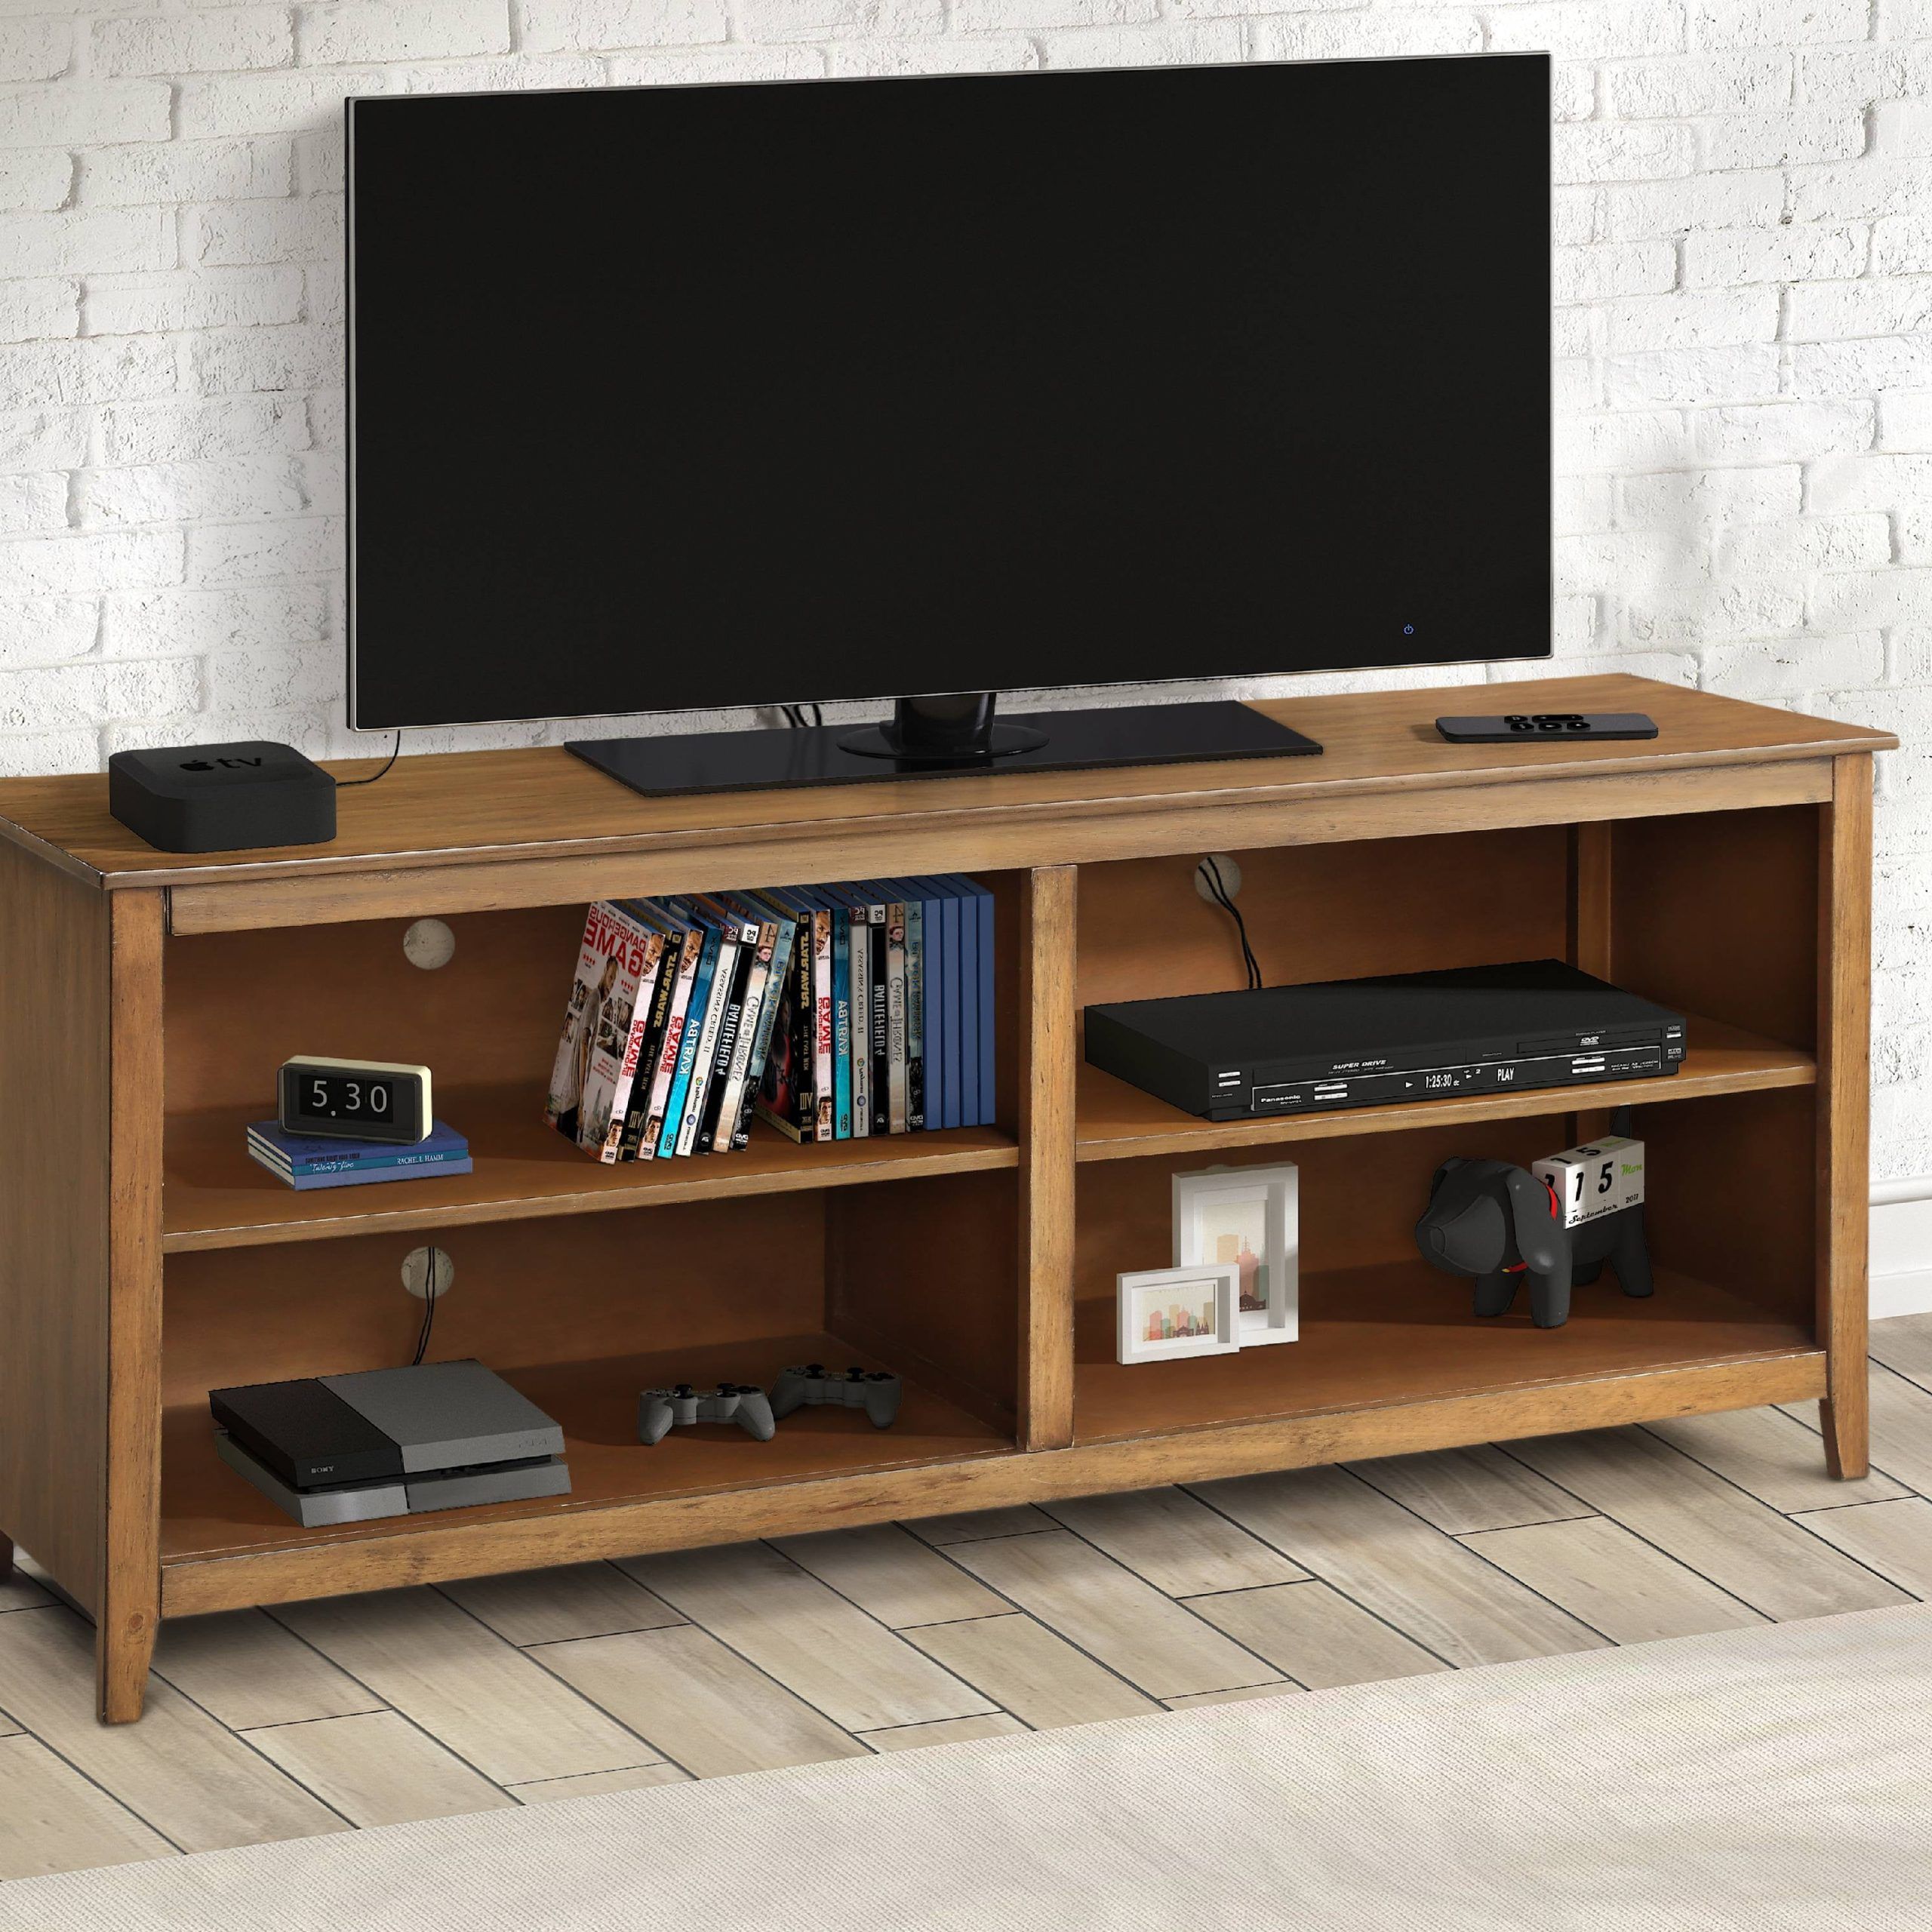 Harper & Bright Designs Wood Tv Stand With Storage For Tv Up To 60 With Regard To Cafe Tv Stands With Storage (View 12 of 20)